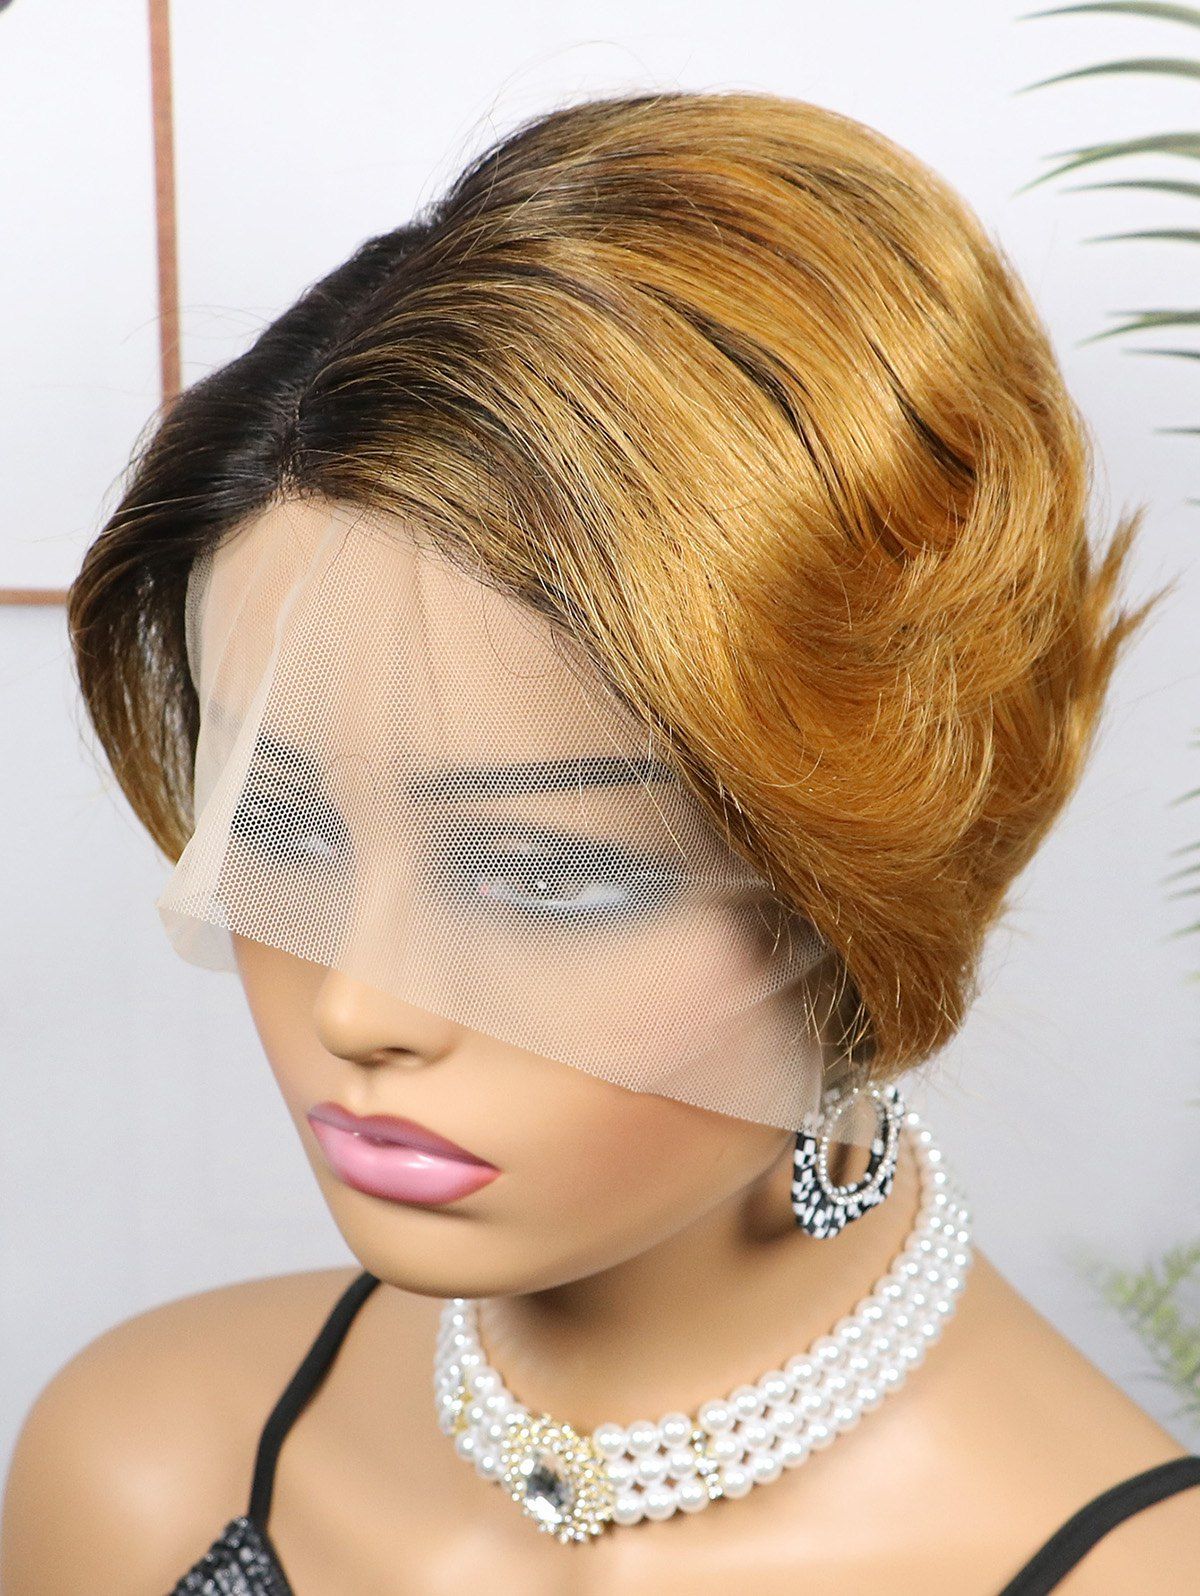 150% Human Hair Short Ombre Natural Straight Lace Front Wig - multicolor A 8INCH